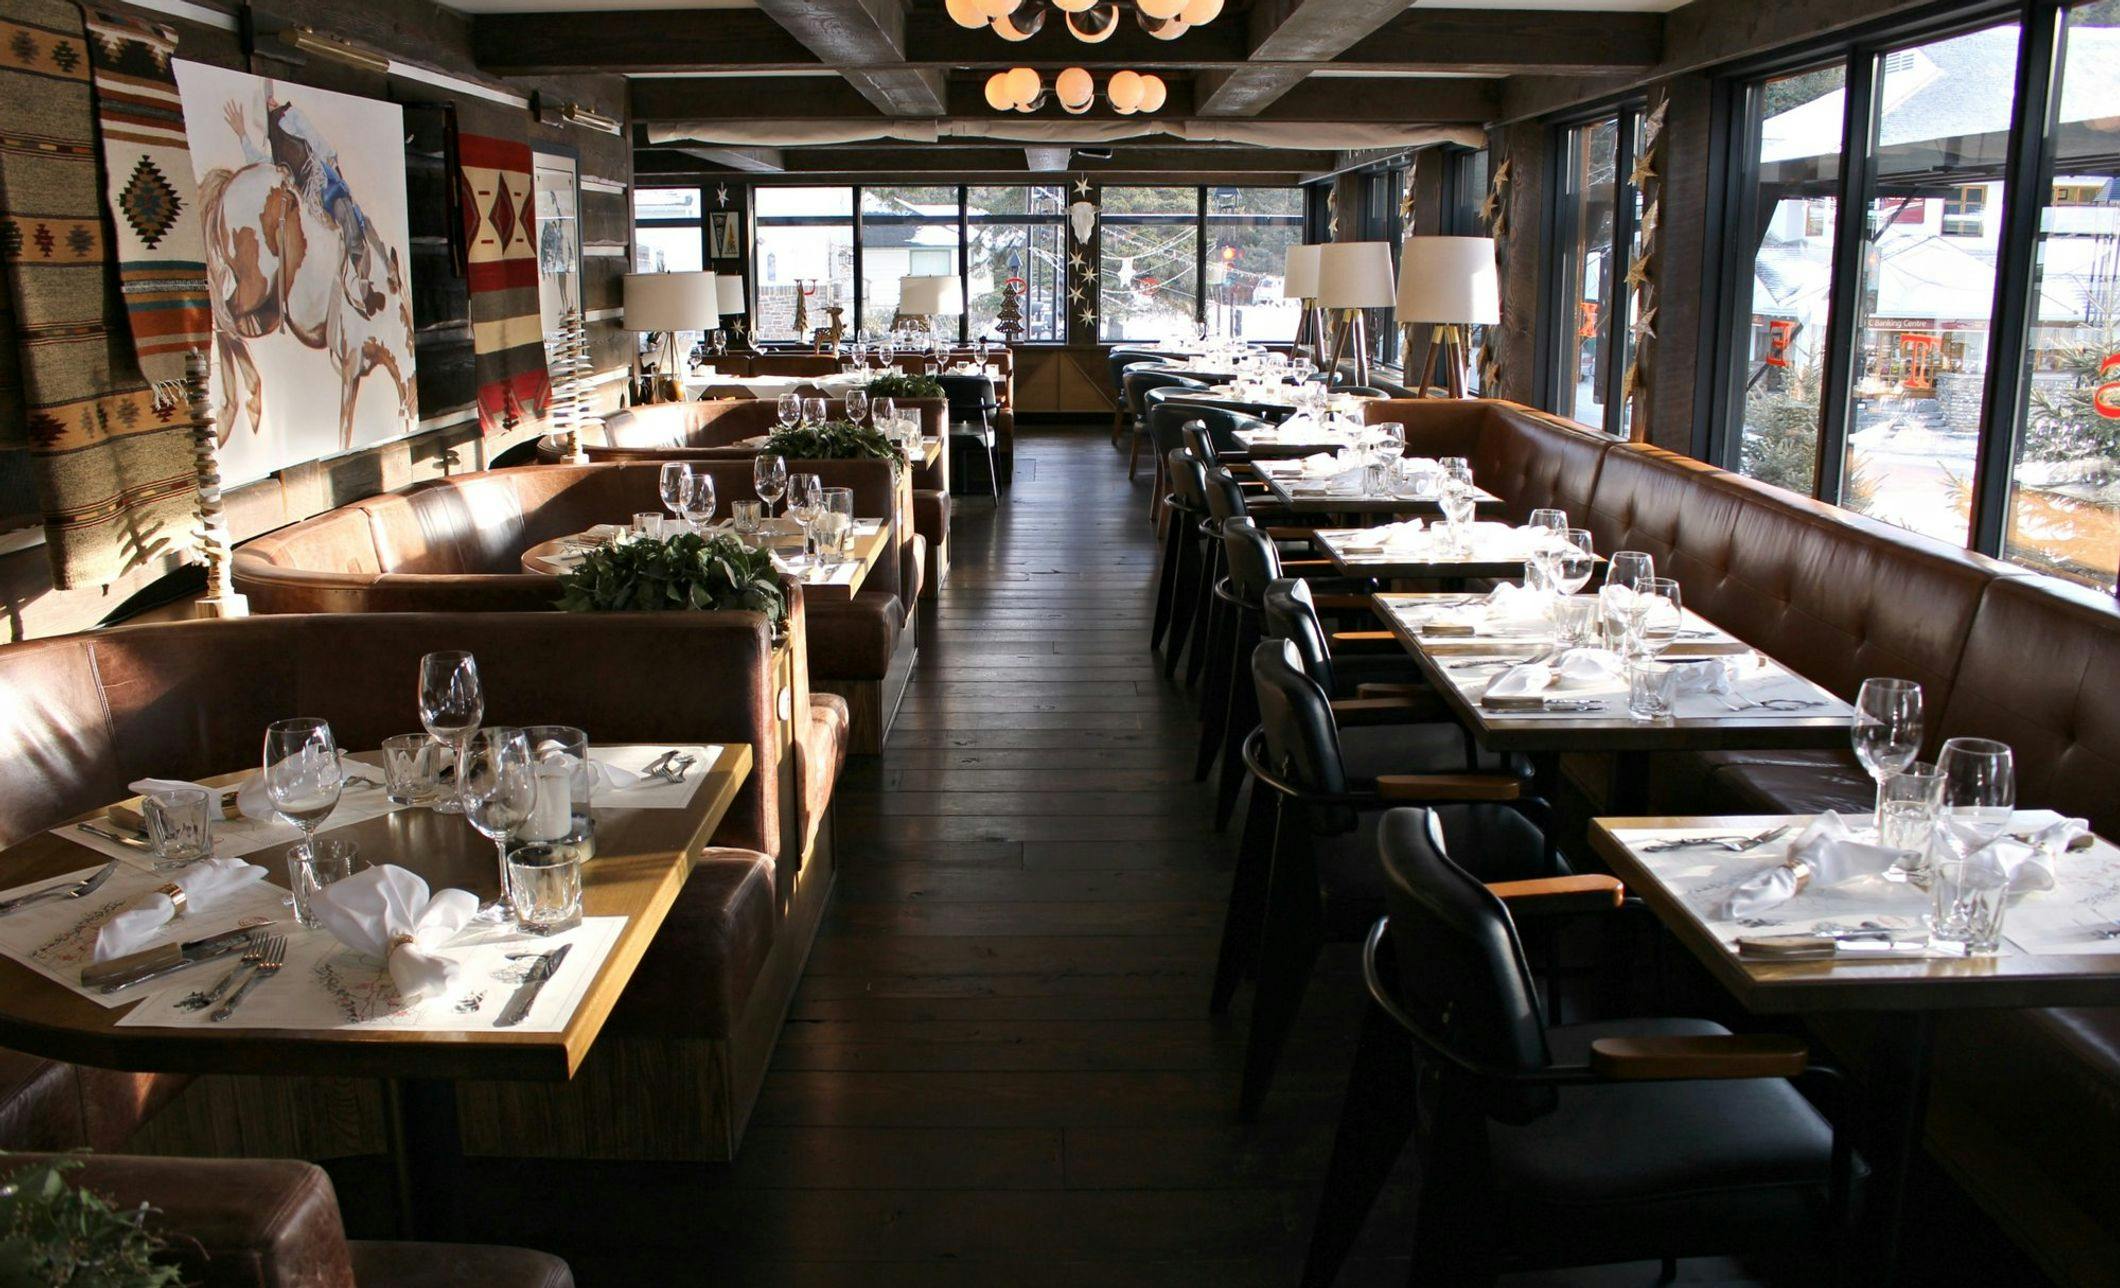 Restaurant interior with a snowy winter day outside